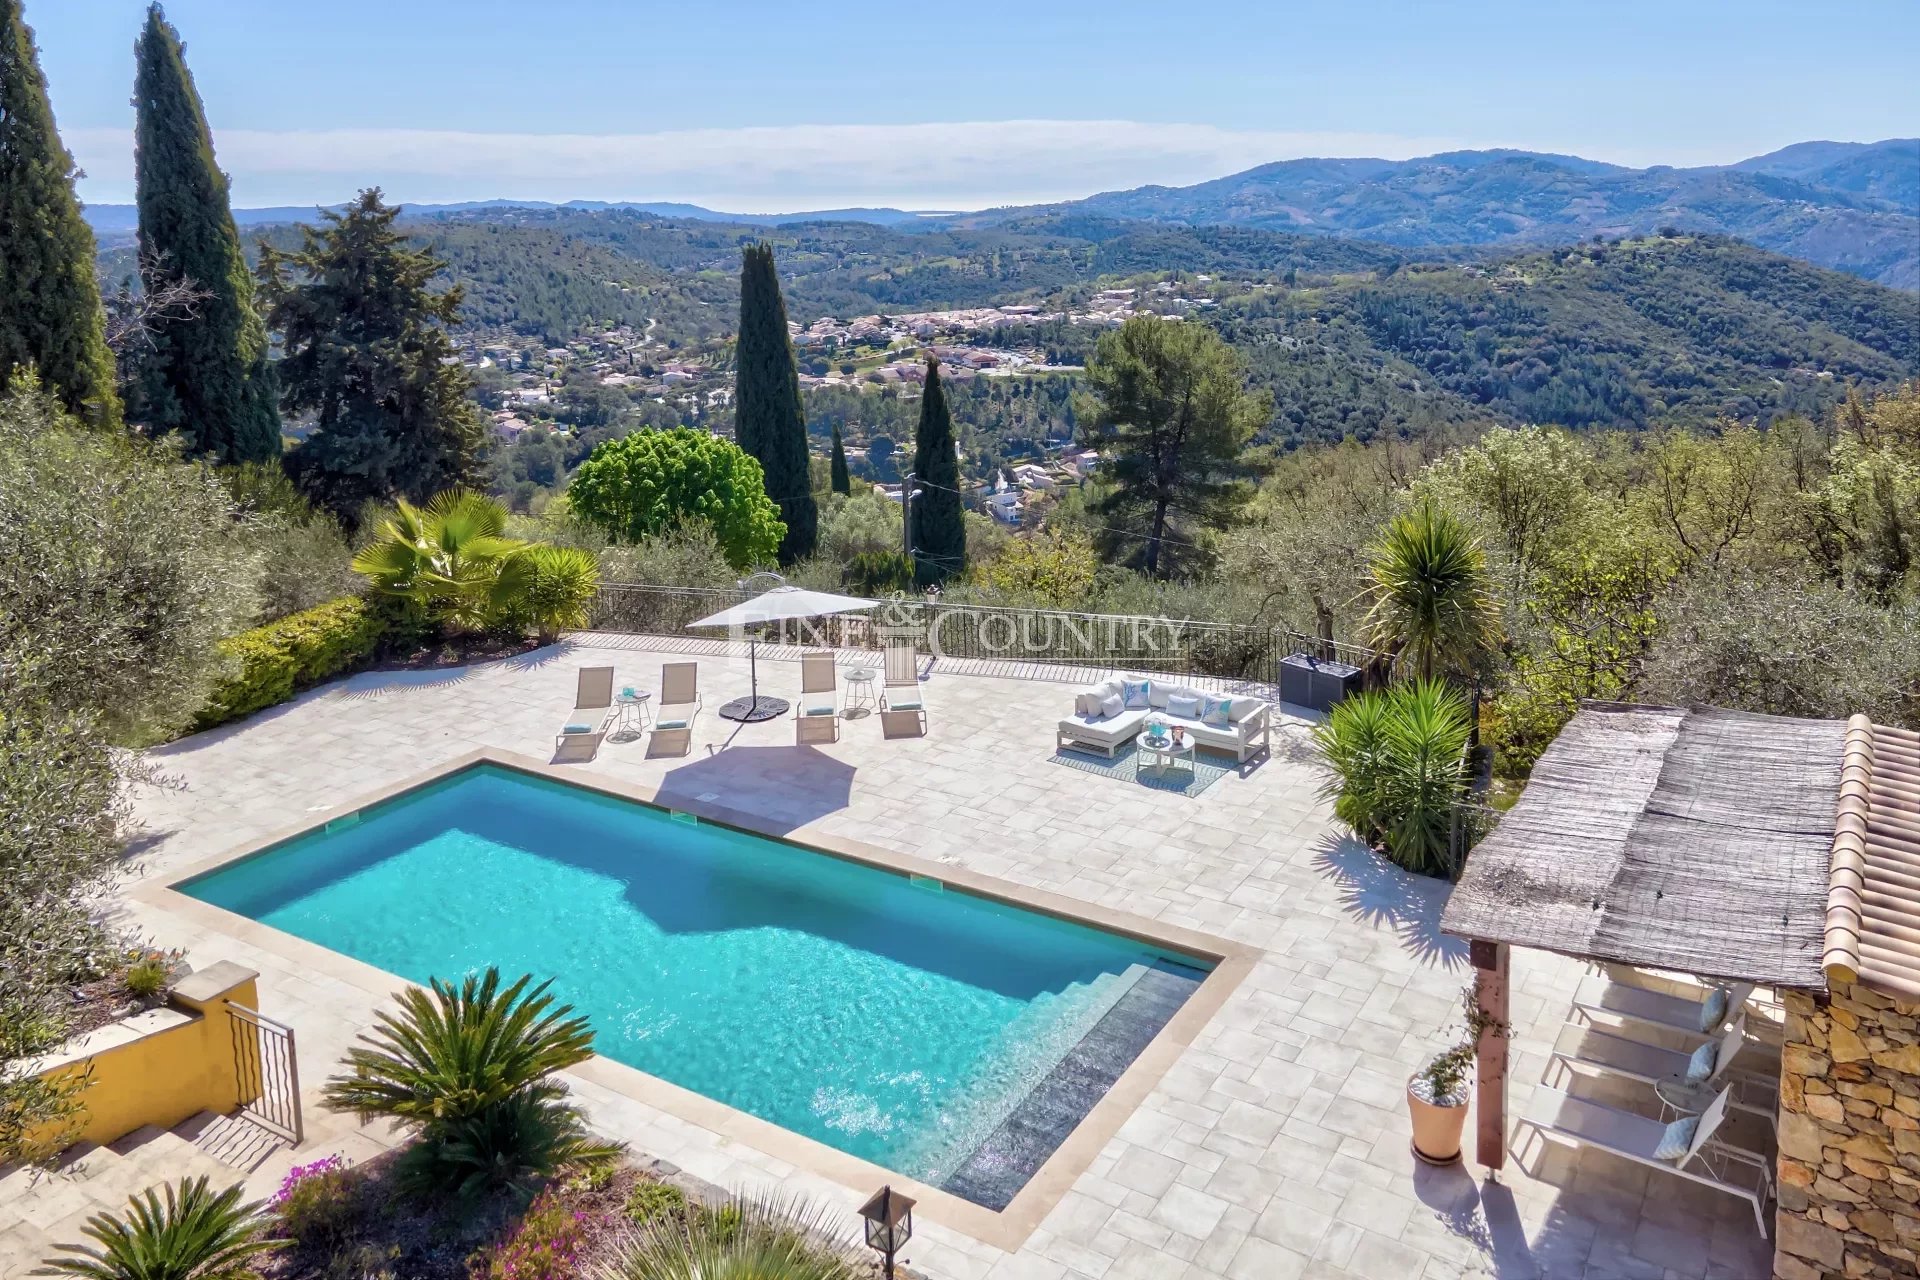 Photo of Villa for sale in Le Tignet, in the hills above Cannes